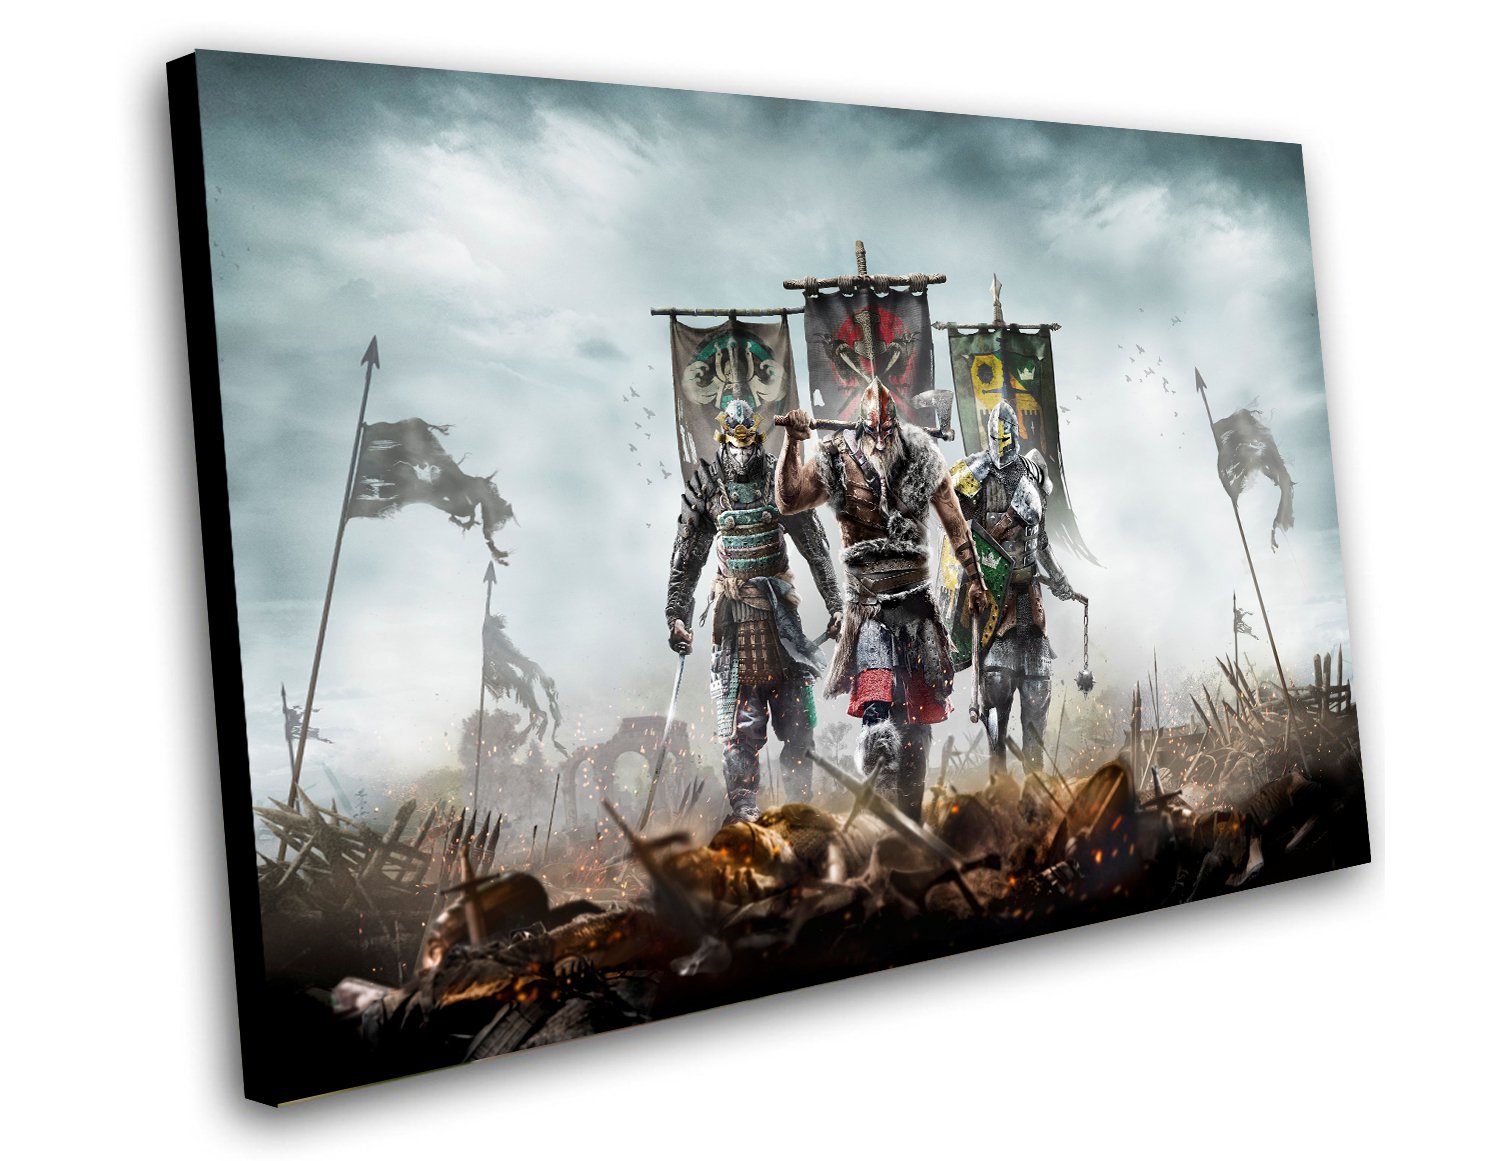 For Honor Game 12"x16" (30cm/40cm) Canvas Print